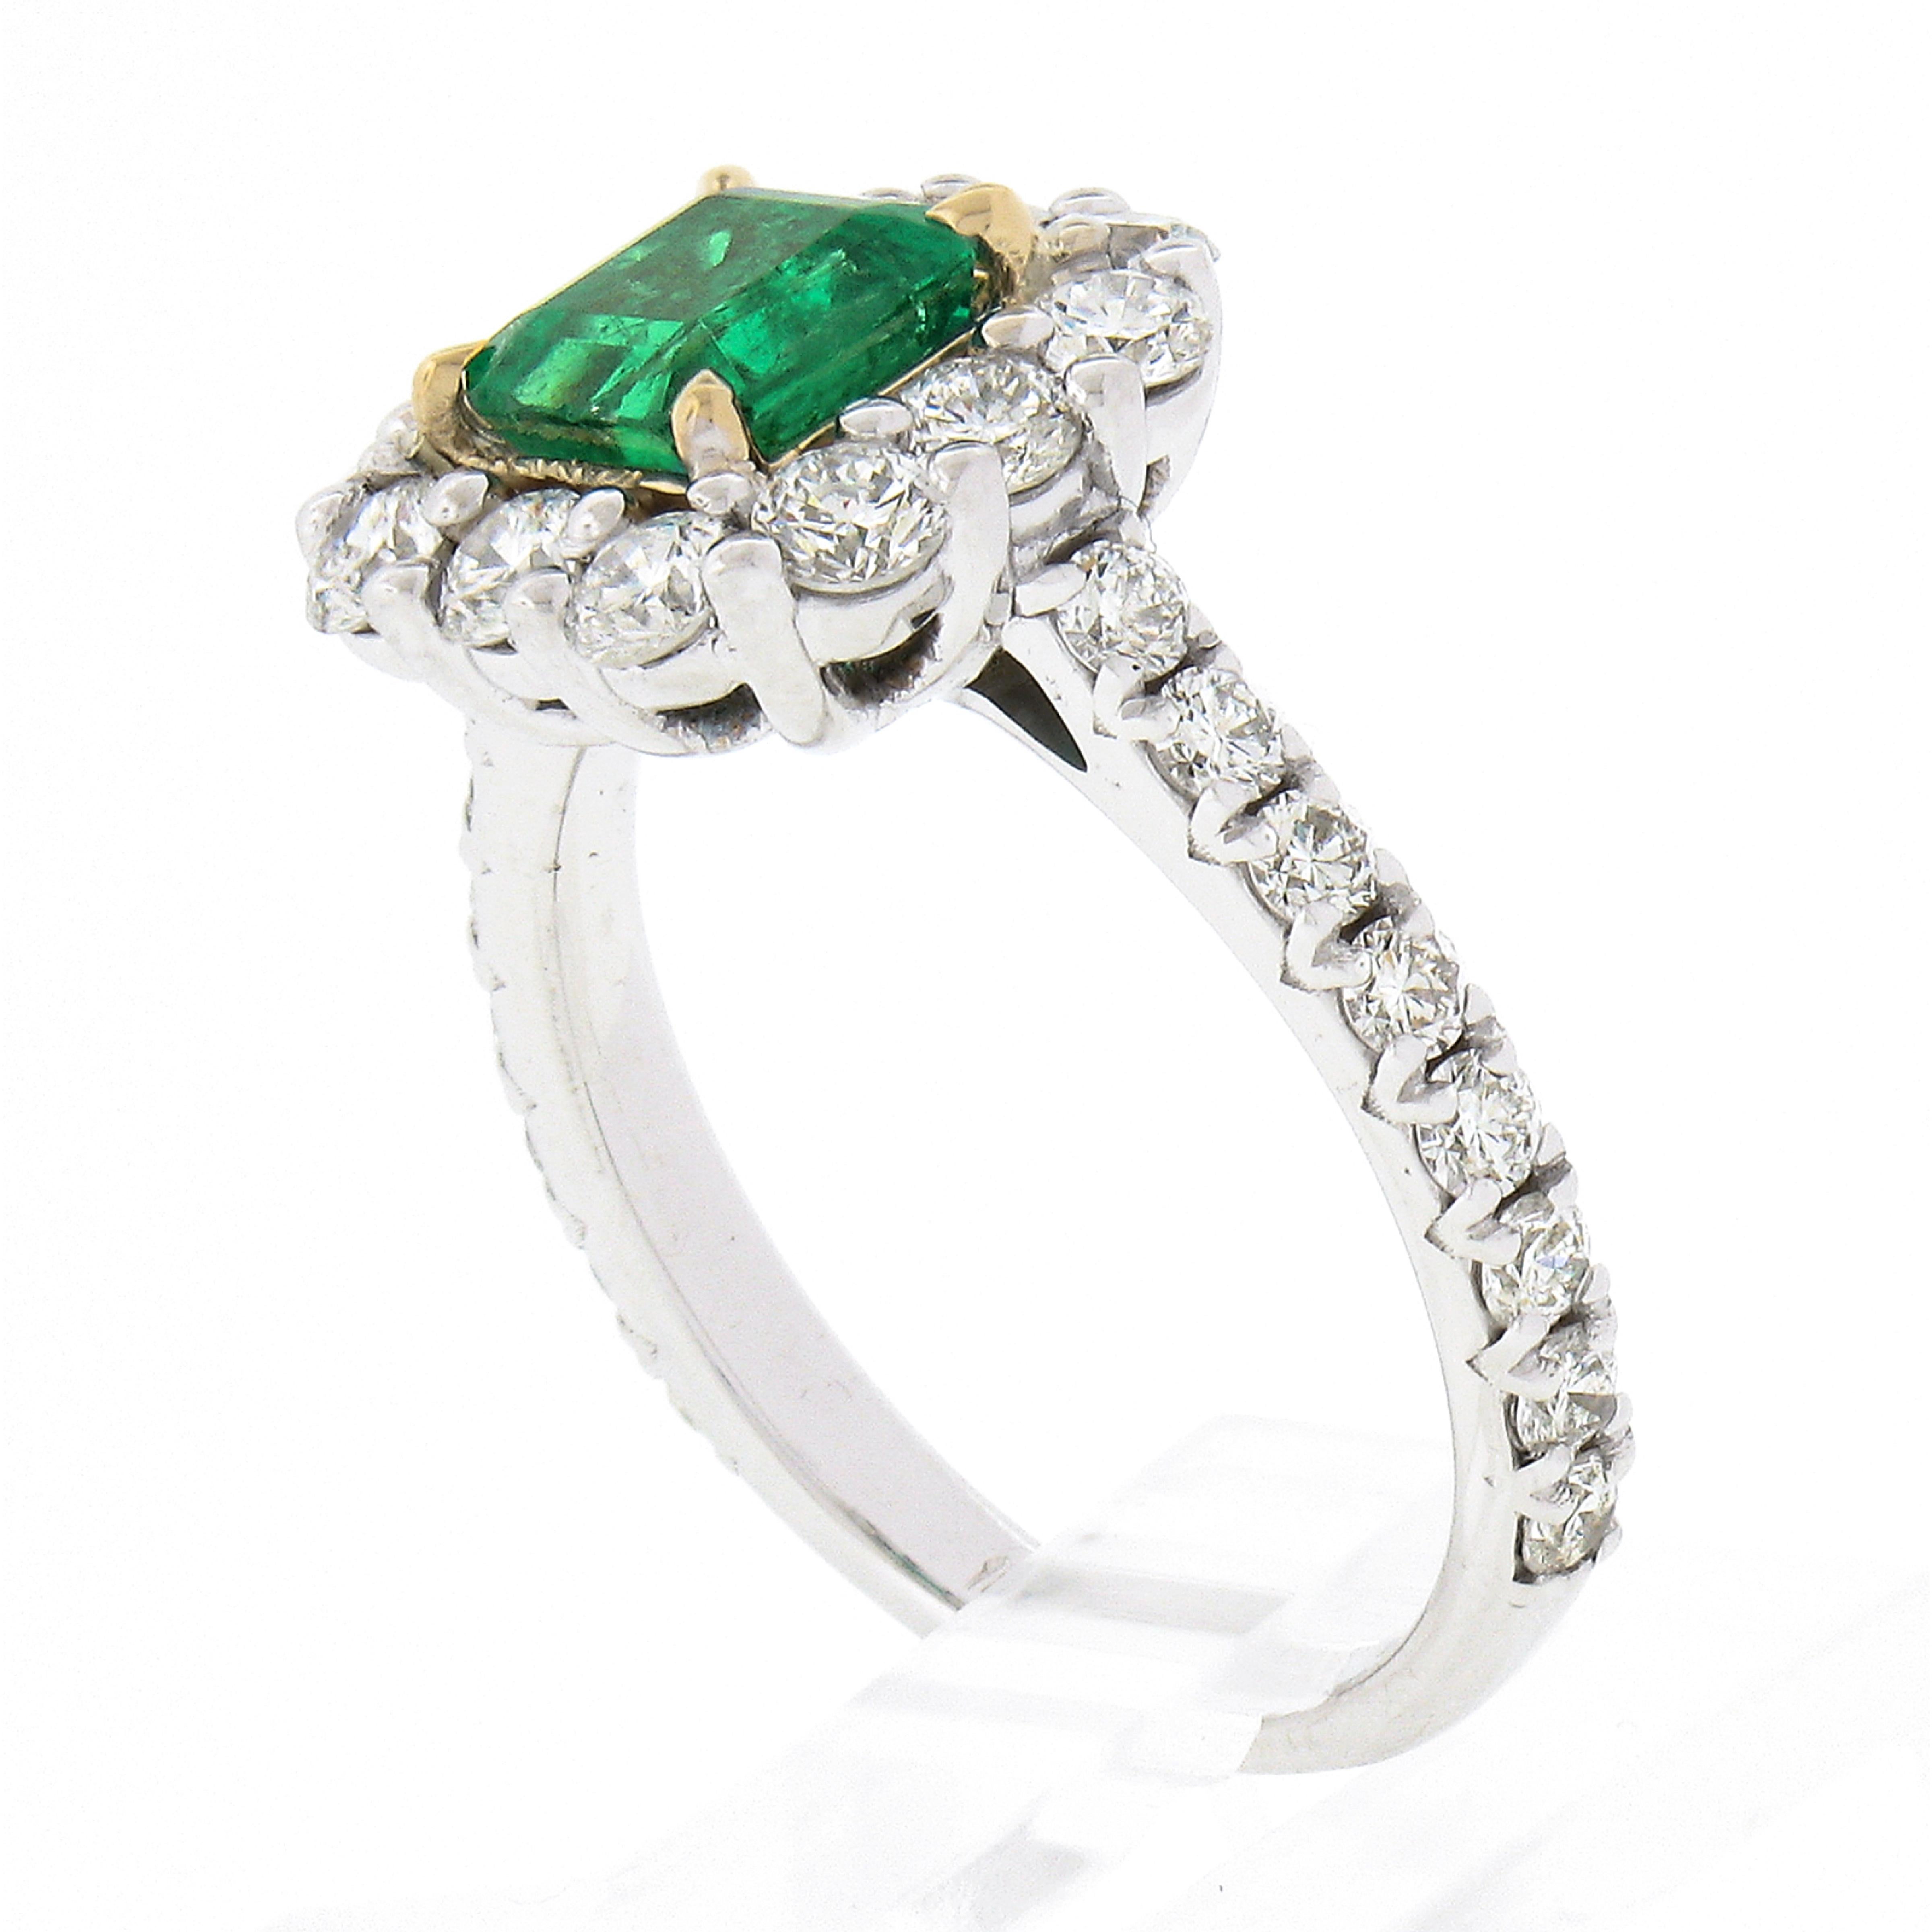 New 18k TT Gold 2.51ctw GIA Colombia Green Emerald w/ Diamond Halo Cocktail Ring For Sale 3